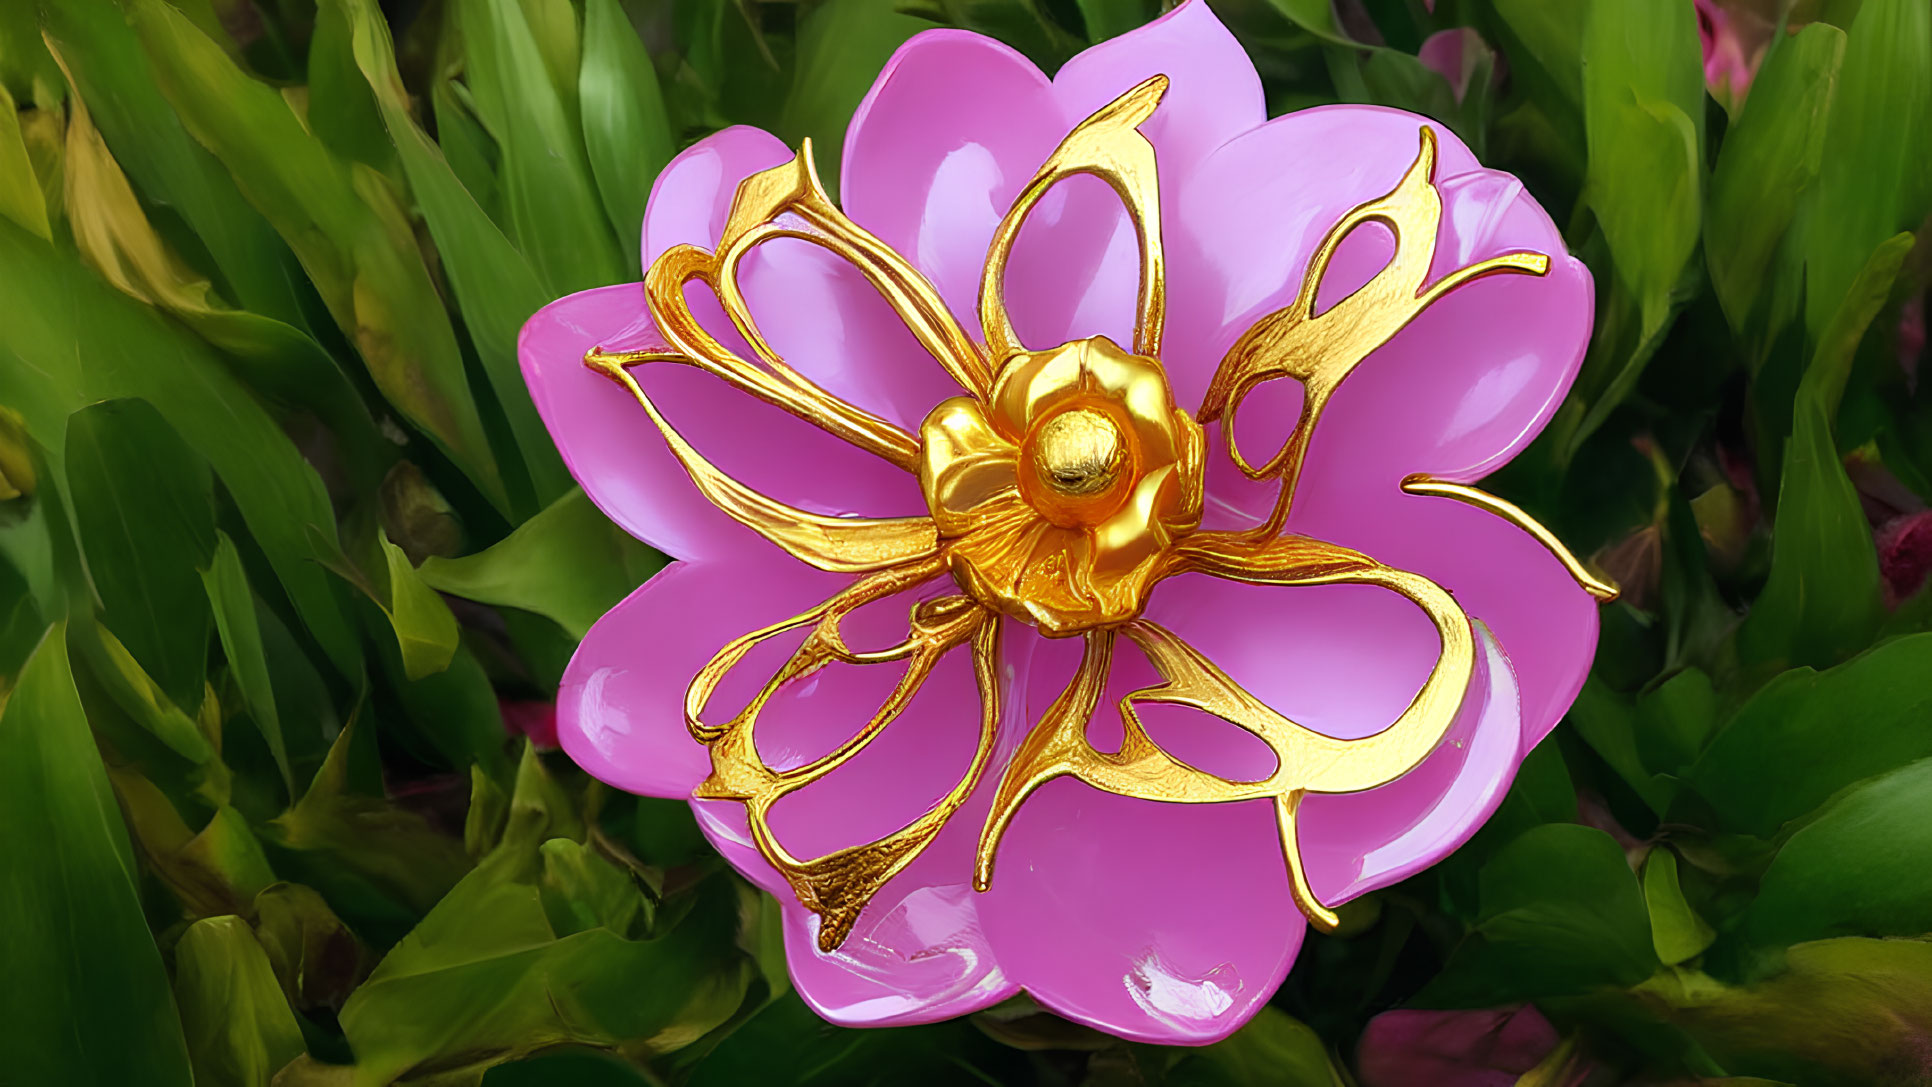 Pink and Gold Ornamental Flower on Green Leaves Background